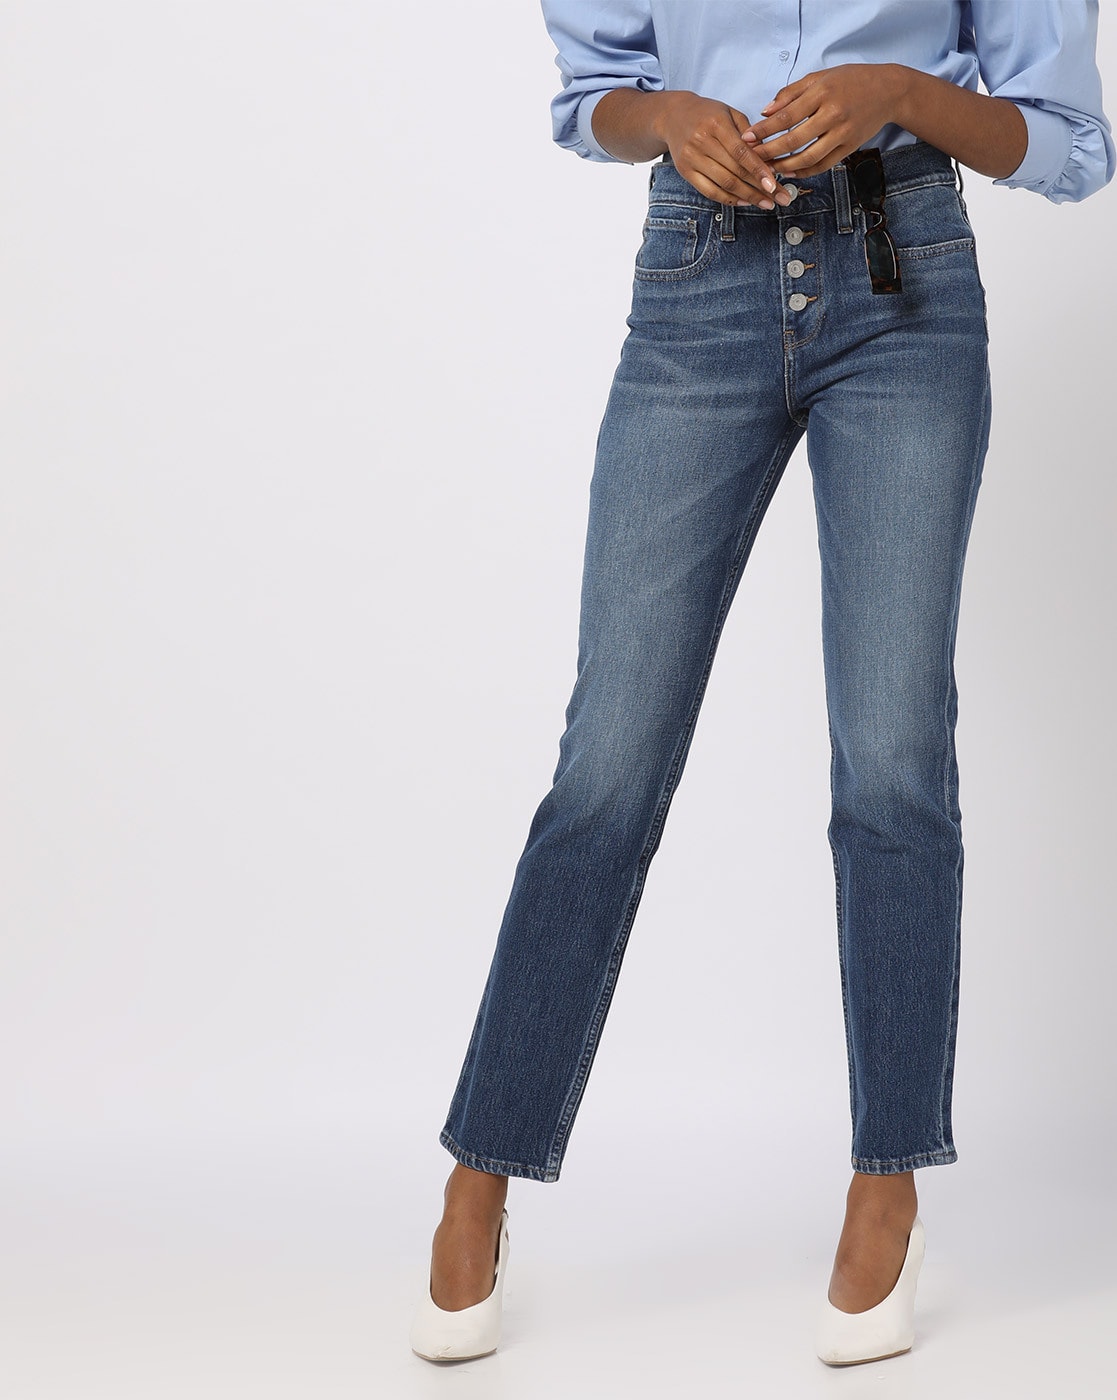 straight blue jeans womens